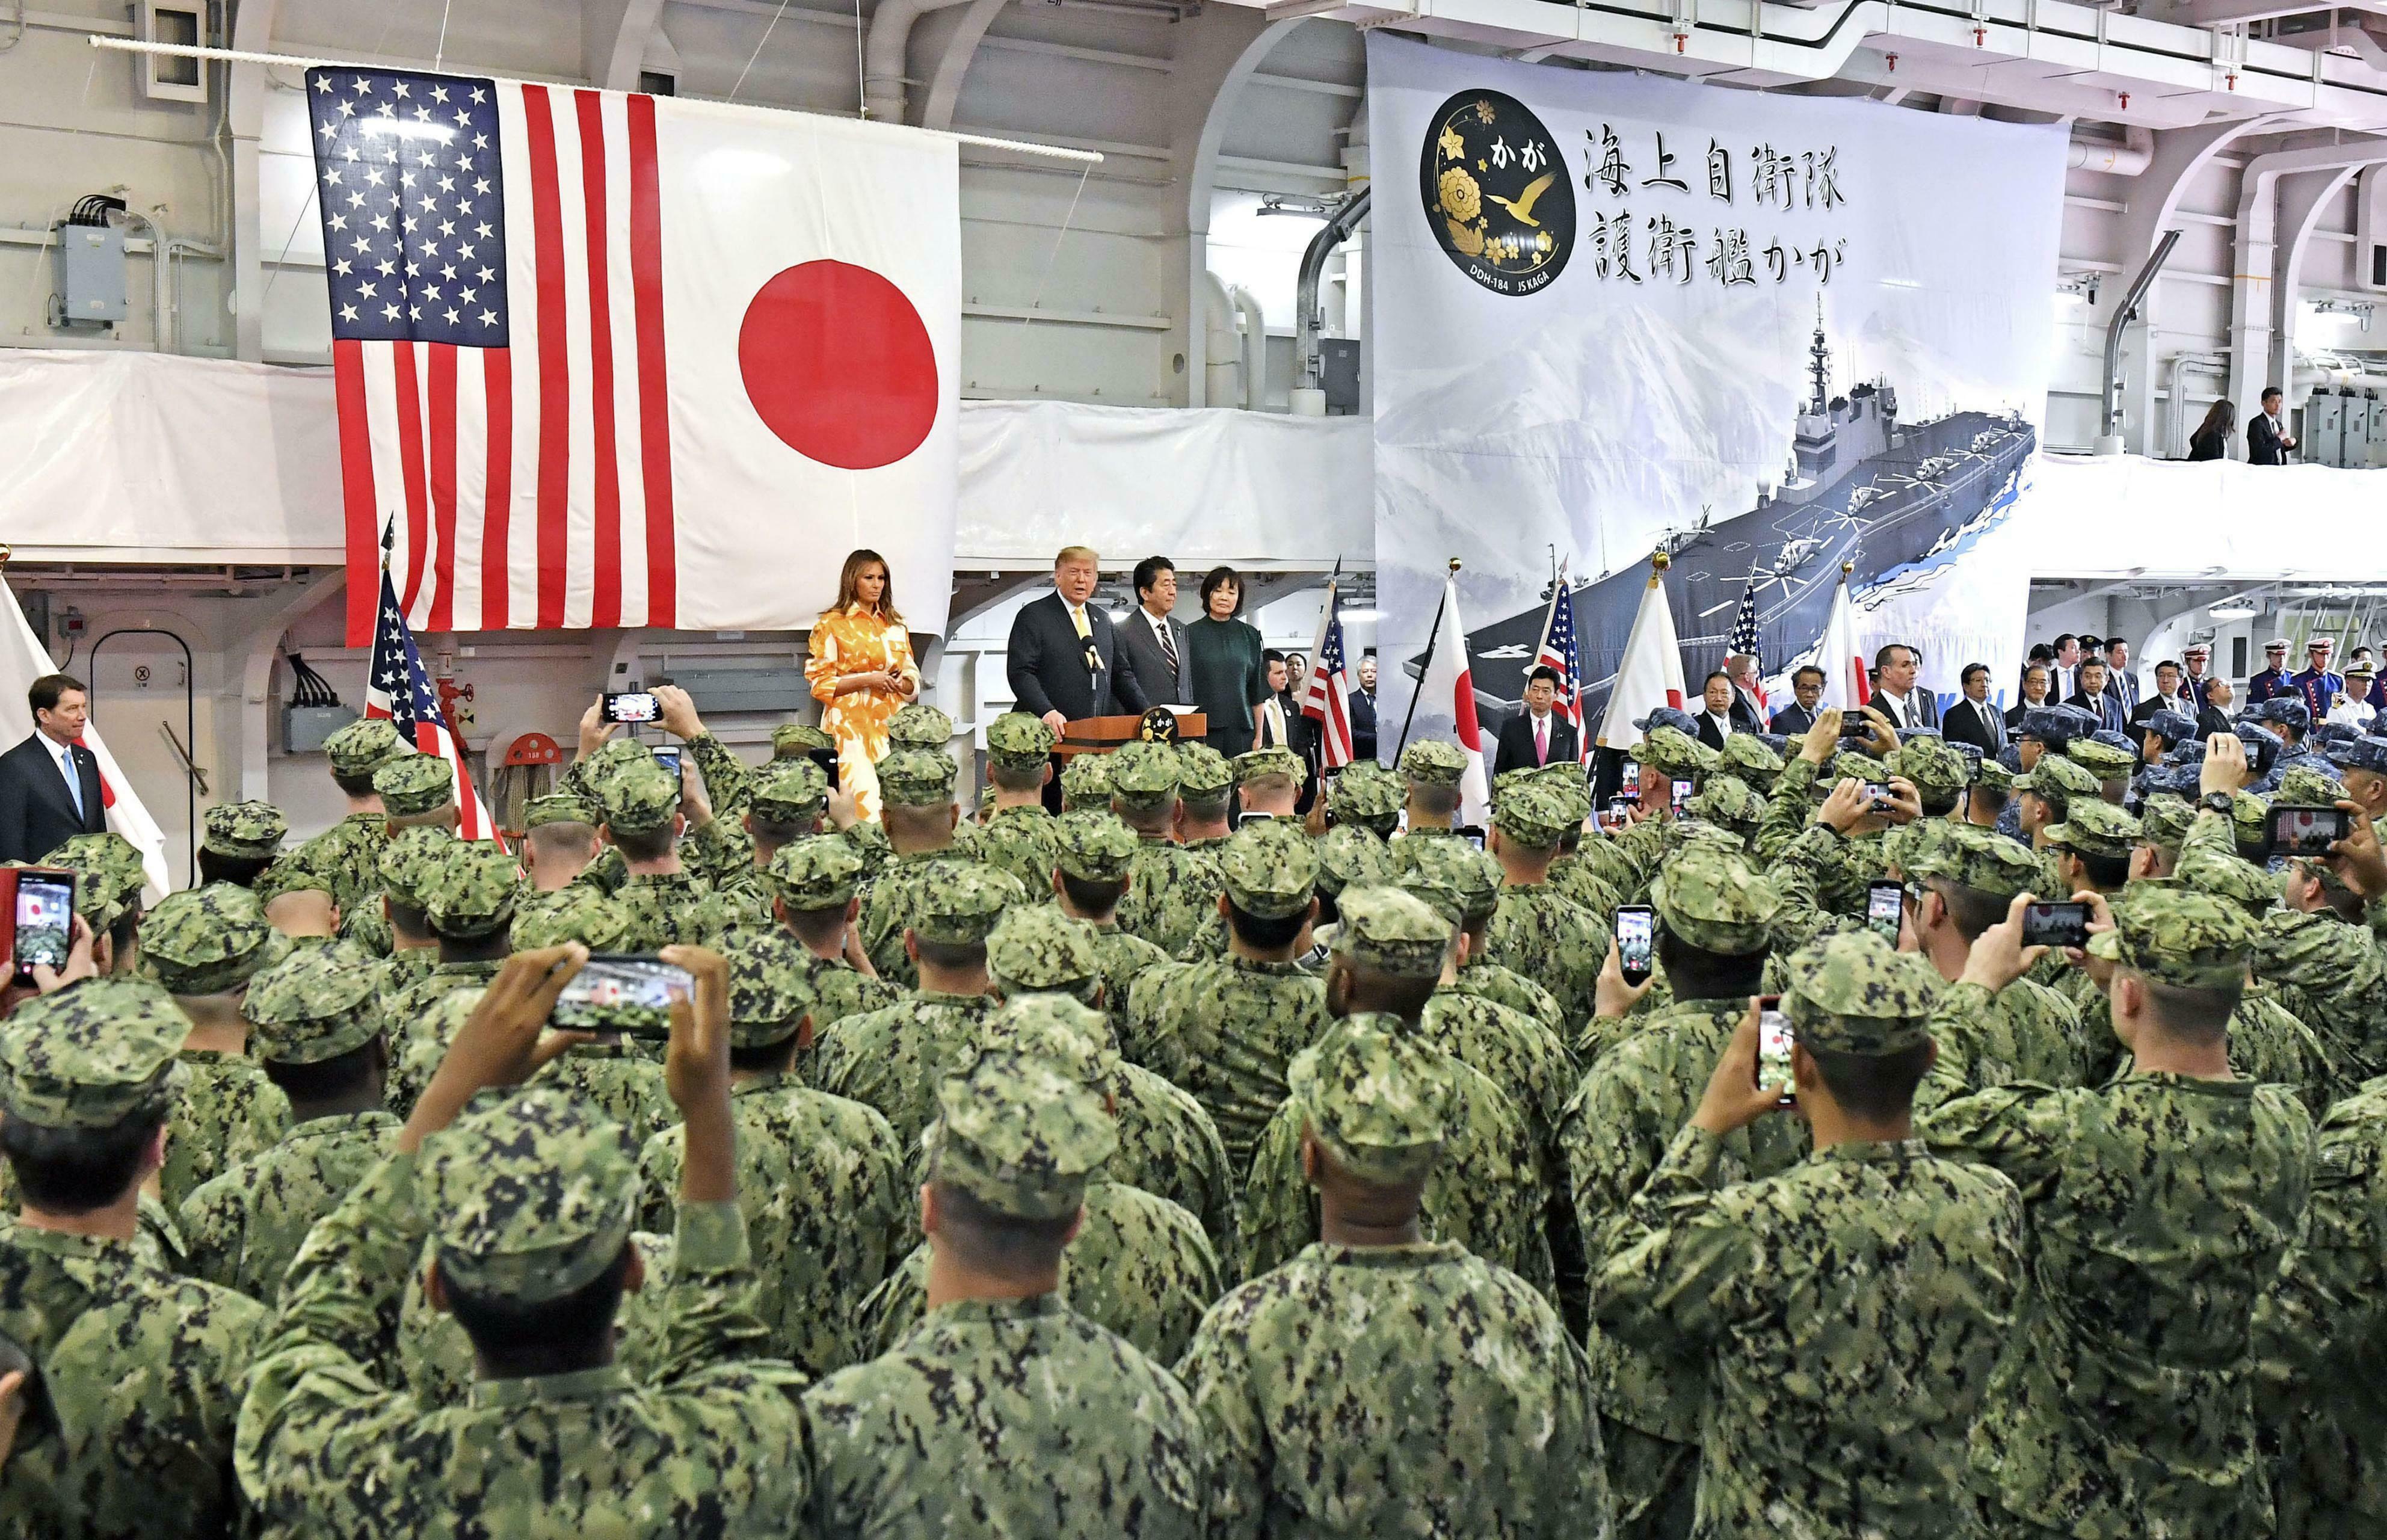 U.S. President Donald Trump (C,L), standing next to Japanese Prime Minister Shinzo Abe (C,R), addresses American and Japanese troops on the Japanese Maritime Self-Defense Force's helicopter-carrying destroyer Kaga, docked at the MSDF base in Yokosuka, south of Tokyo, on May 28, 2019. (Pool photo) (Kyodo via AP Images) ==Kyodo